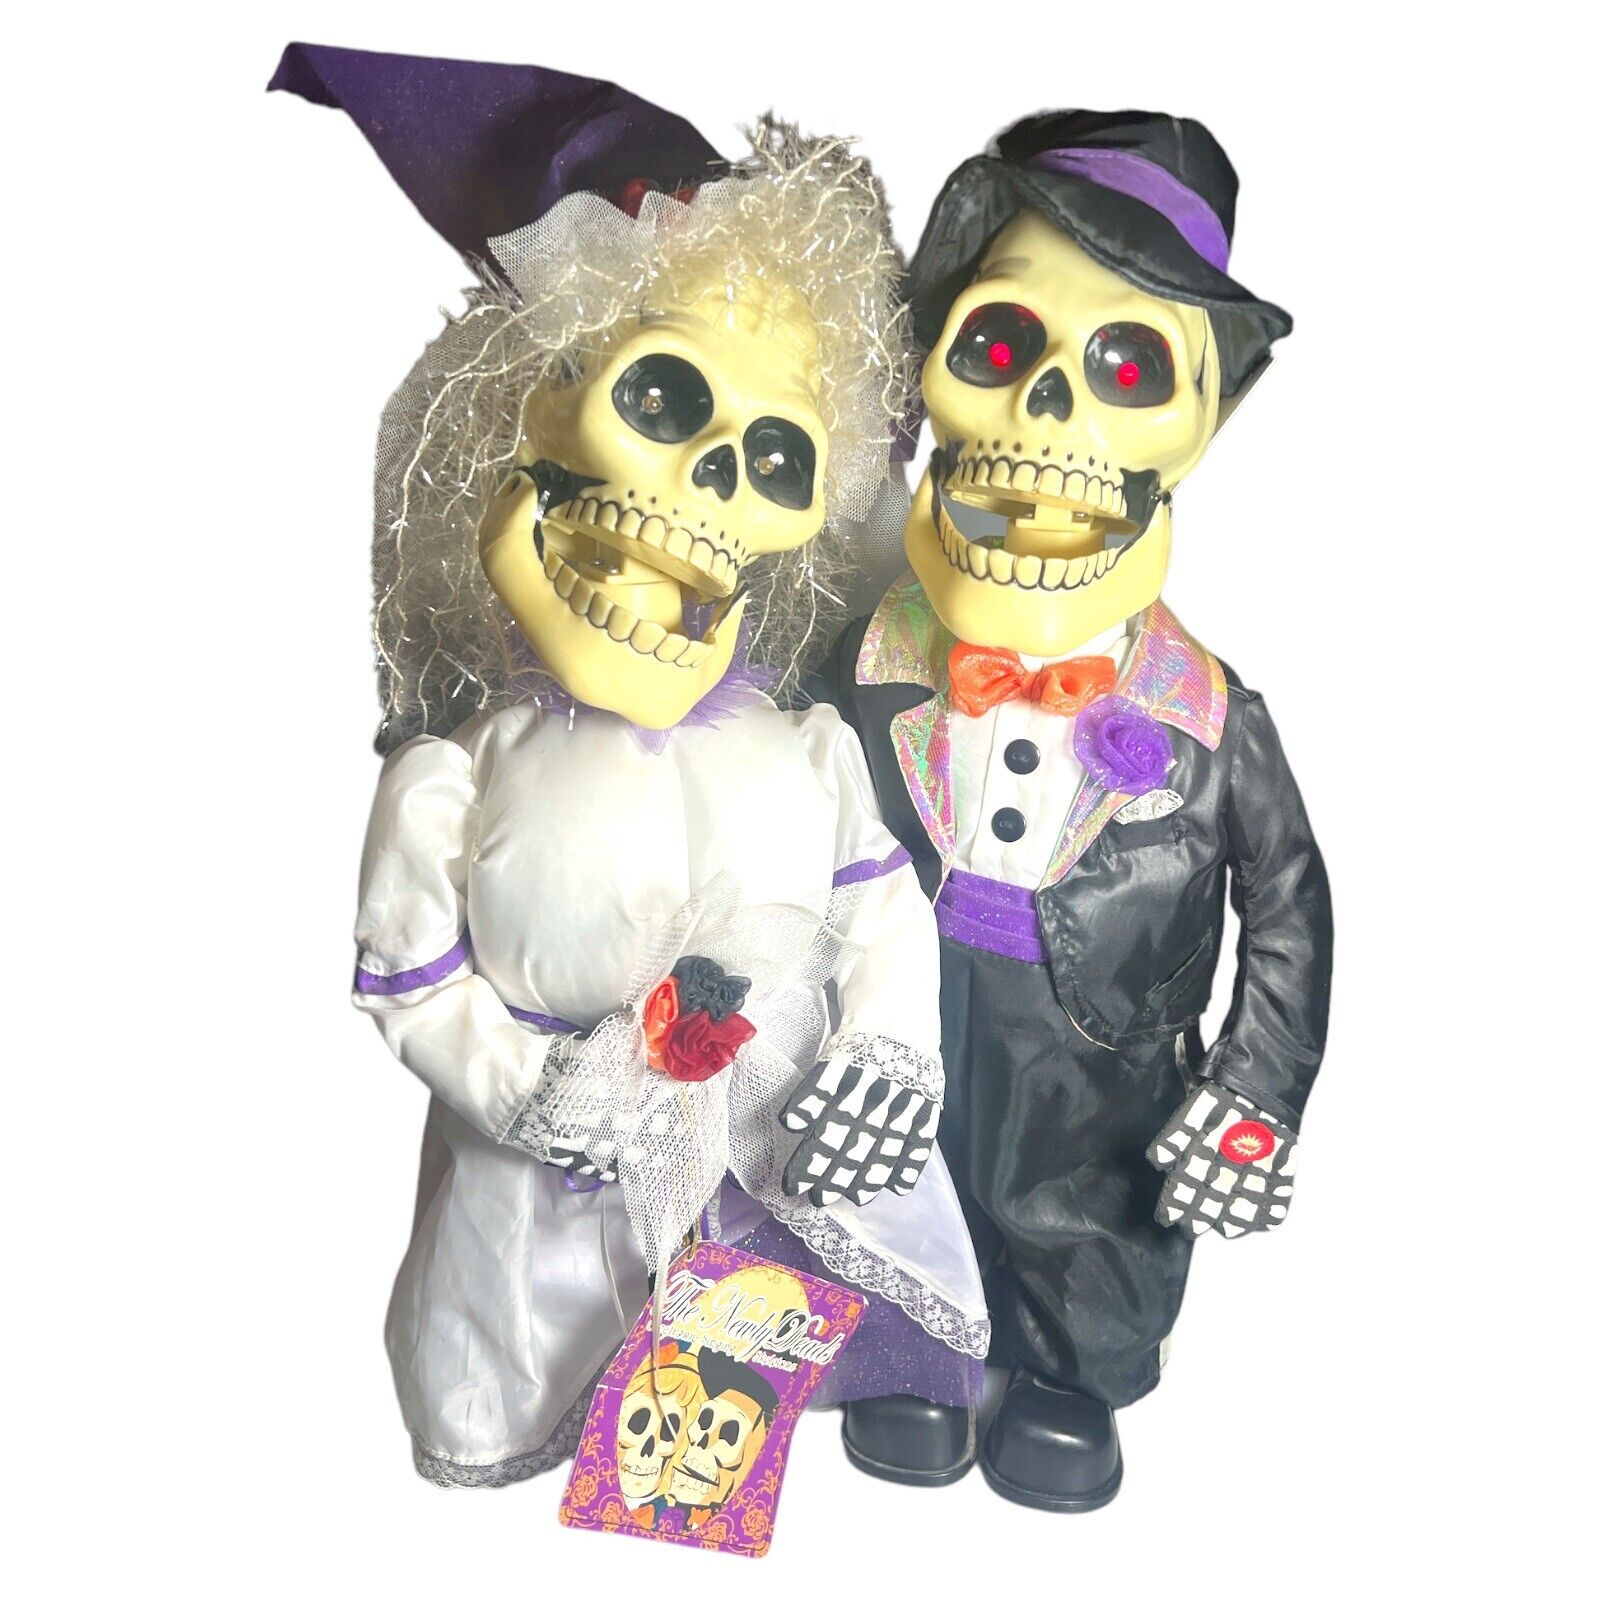 Newly Deads Animated Halloween Bride & Groom Skeletons I Got You Babe 18” NWT